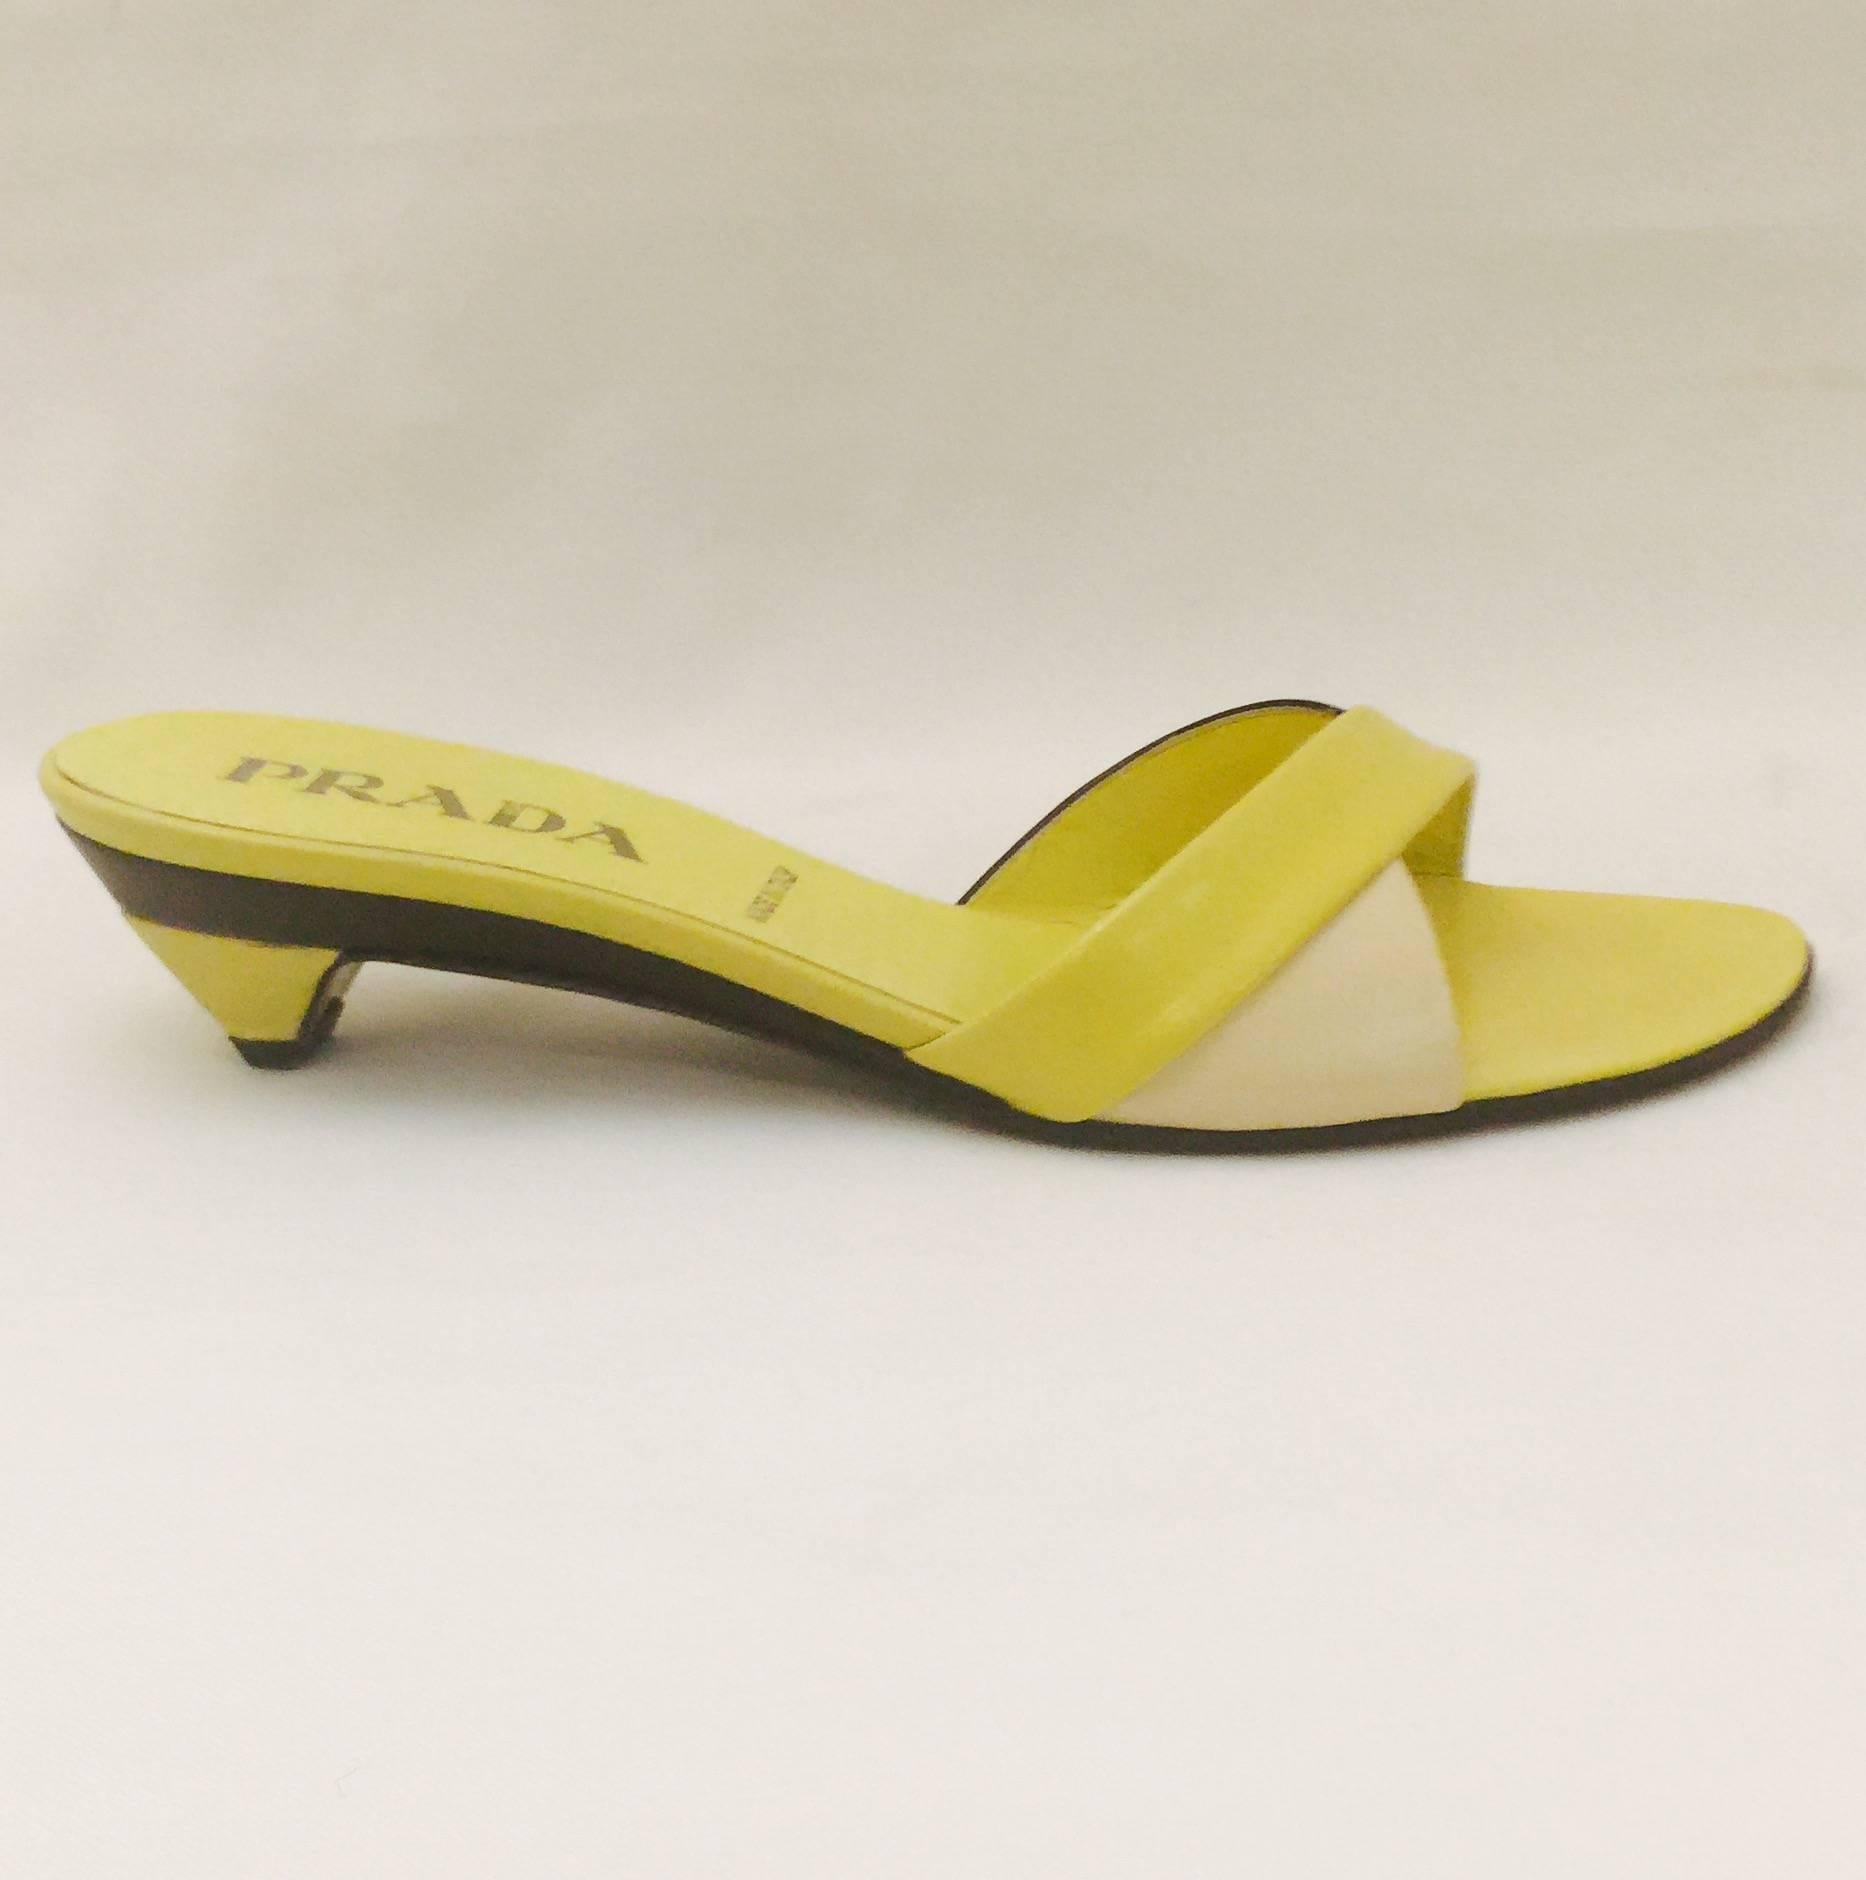 Prada Chartreuse Yellow Color Blocked Slide Sandals are classically feminine and a must for all devotees of Miu Miu!  Features exuberant black, ivory, and chartreuse yellow color blocking on architectural heels and across the strap vamps.  Leather